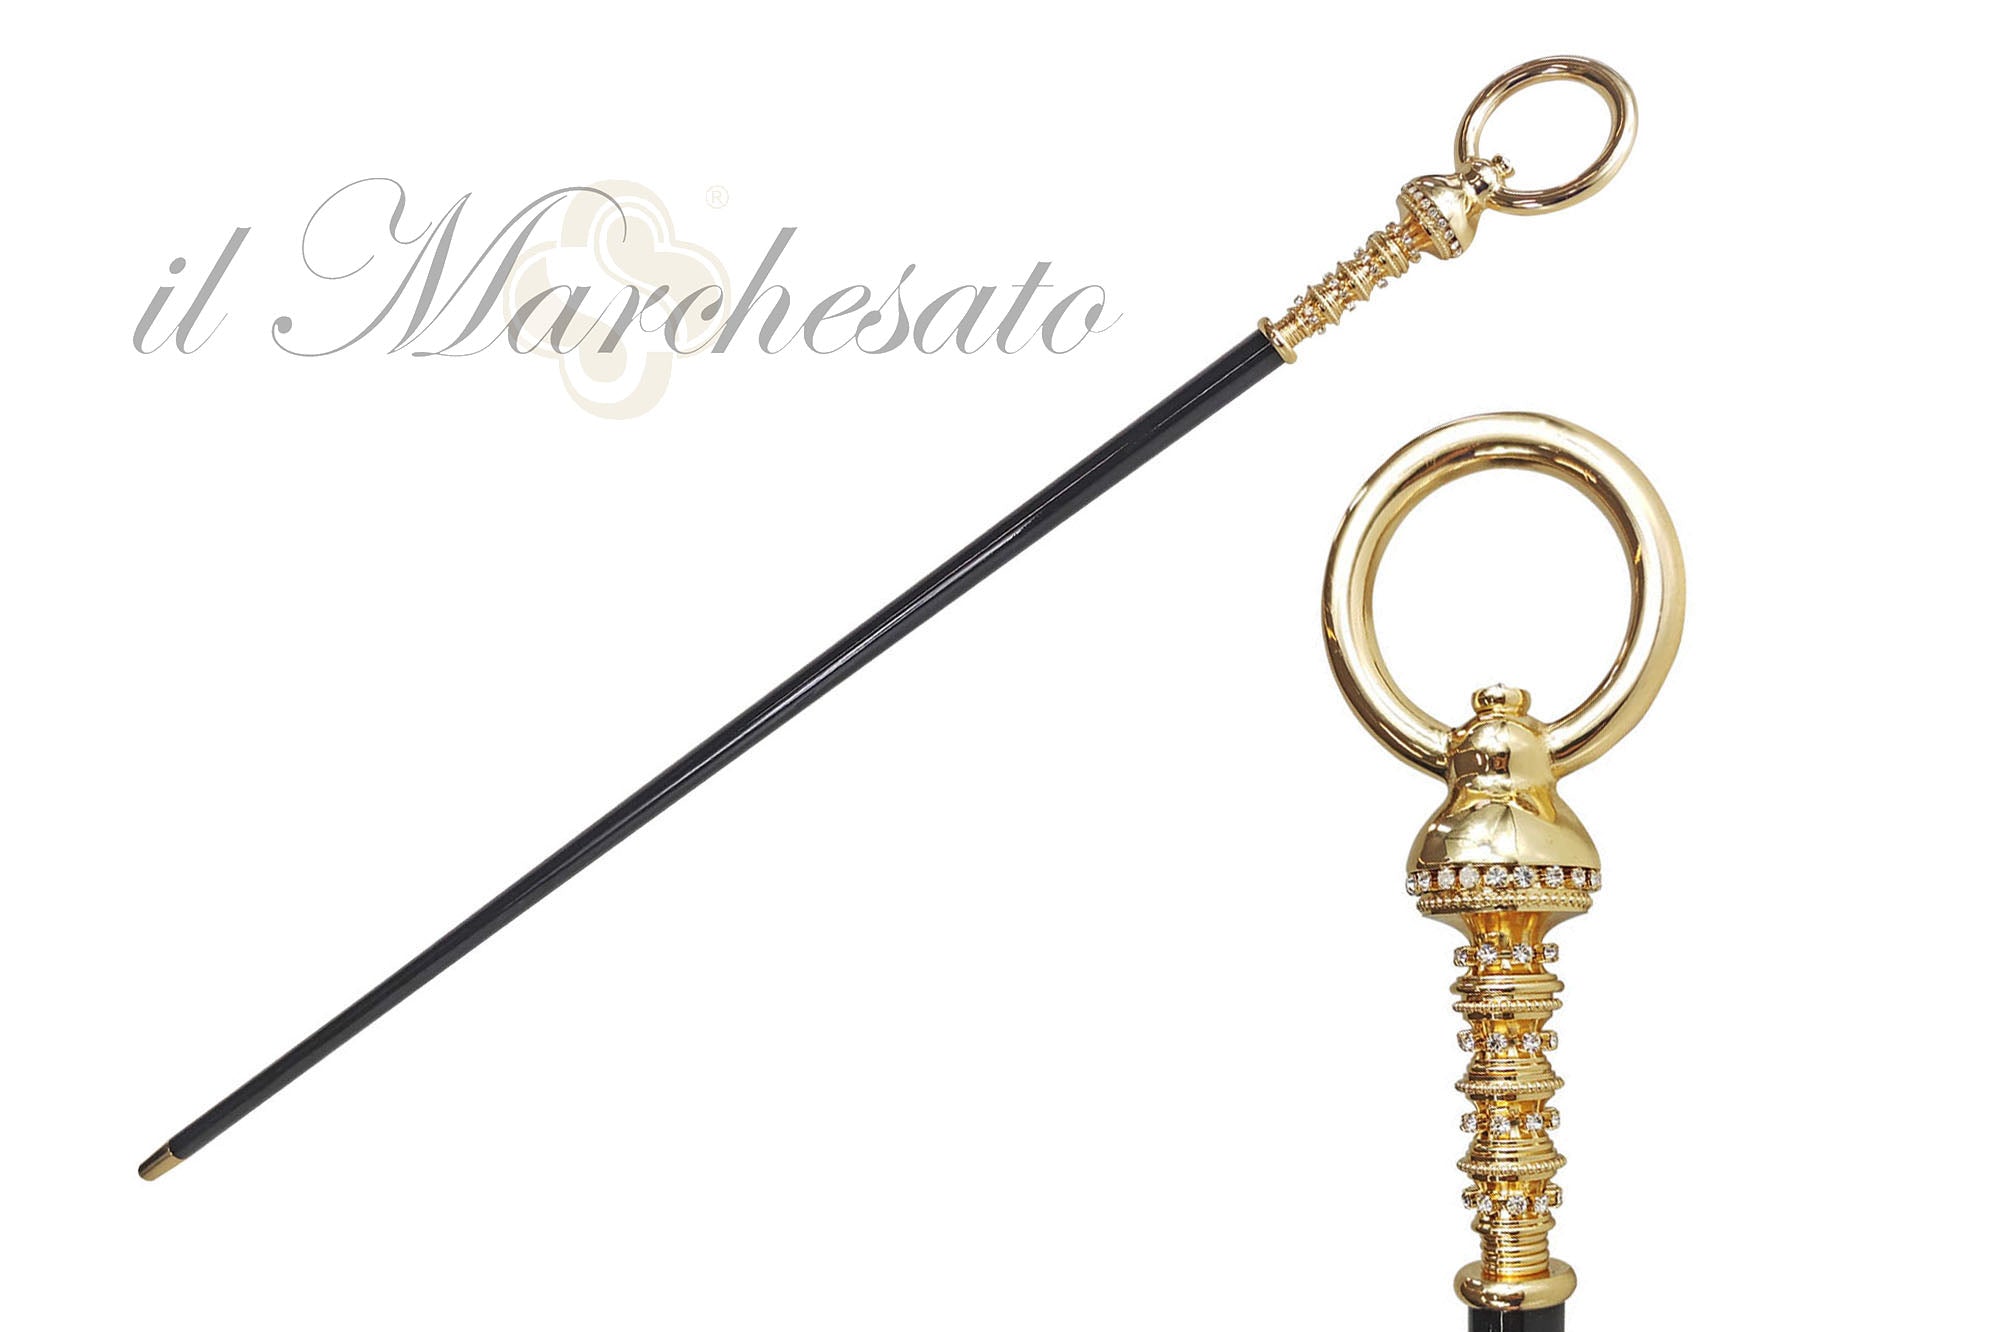 Majestic 24K goldplated brass - walking stick – ilMarchesato - Luxury  Umbrellas, Canes and Shoehorns